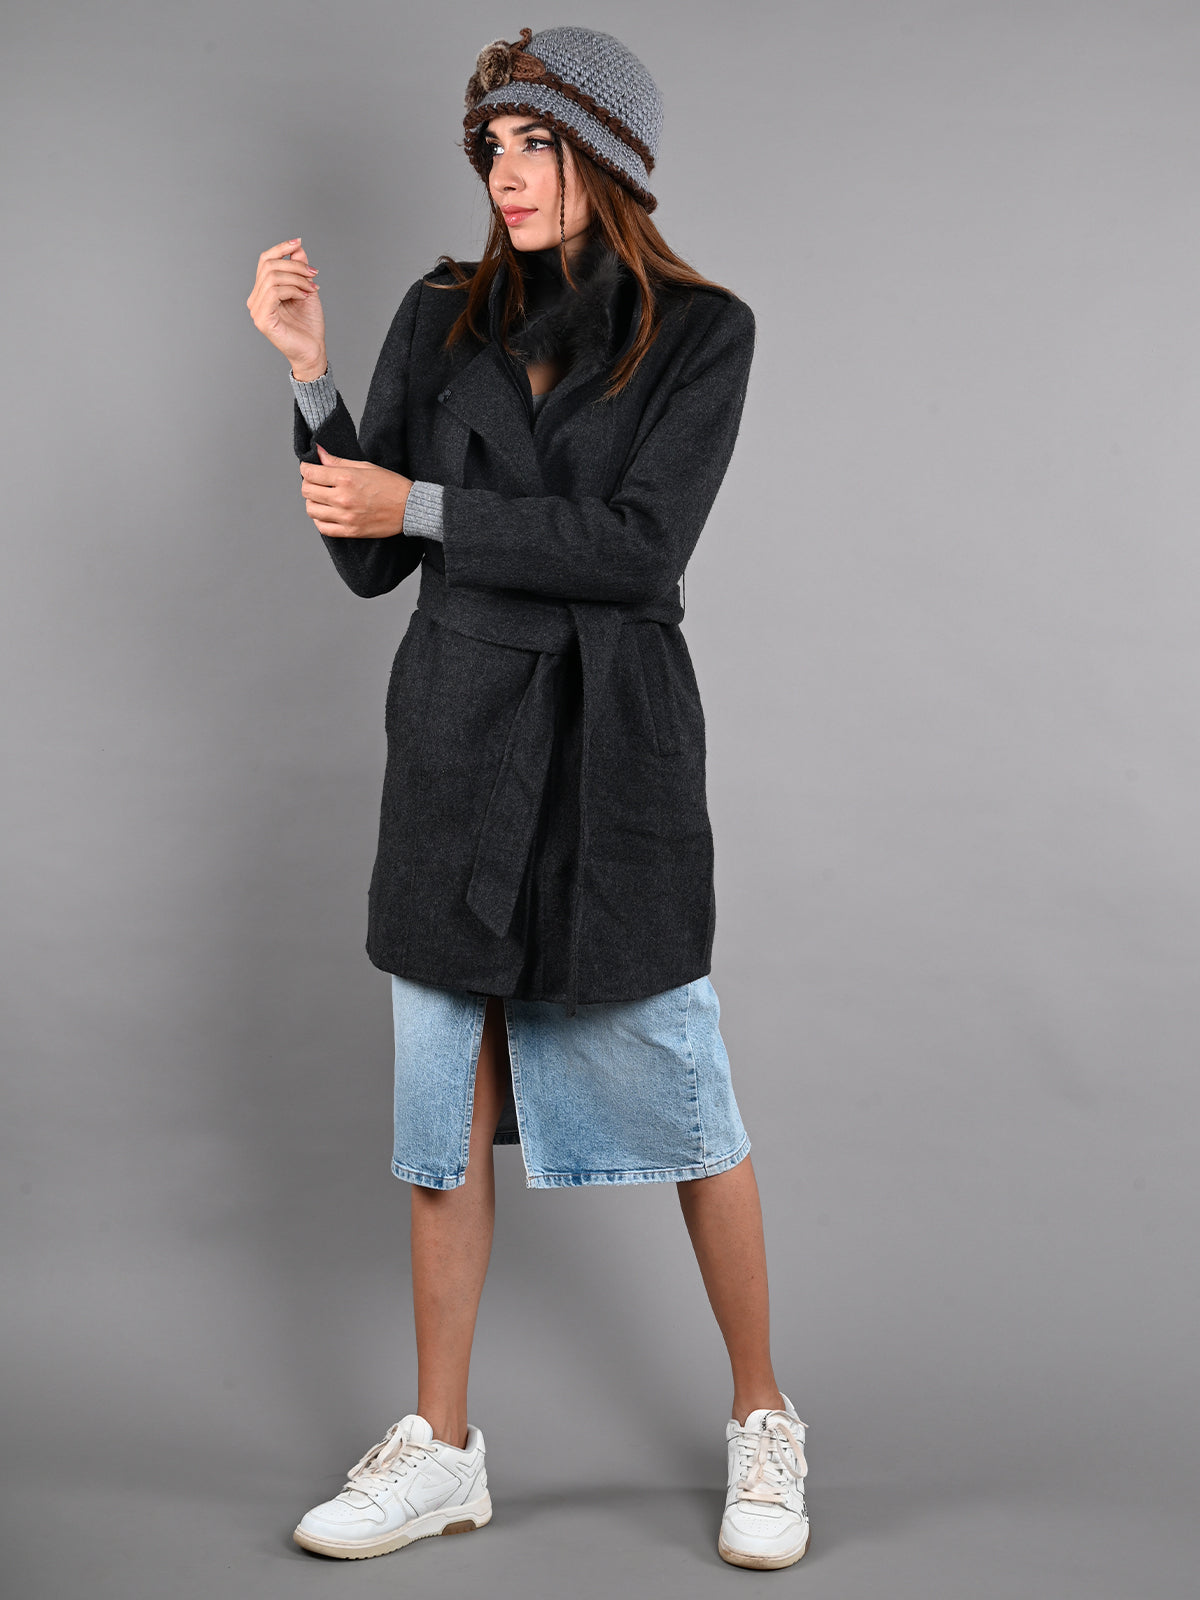 Ganni Wool Wide Collar Jacket in Sky Captain | WE ARE ICONIC